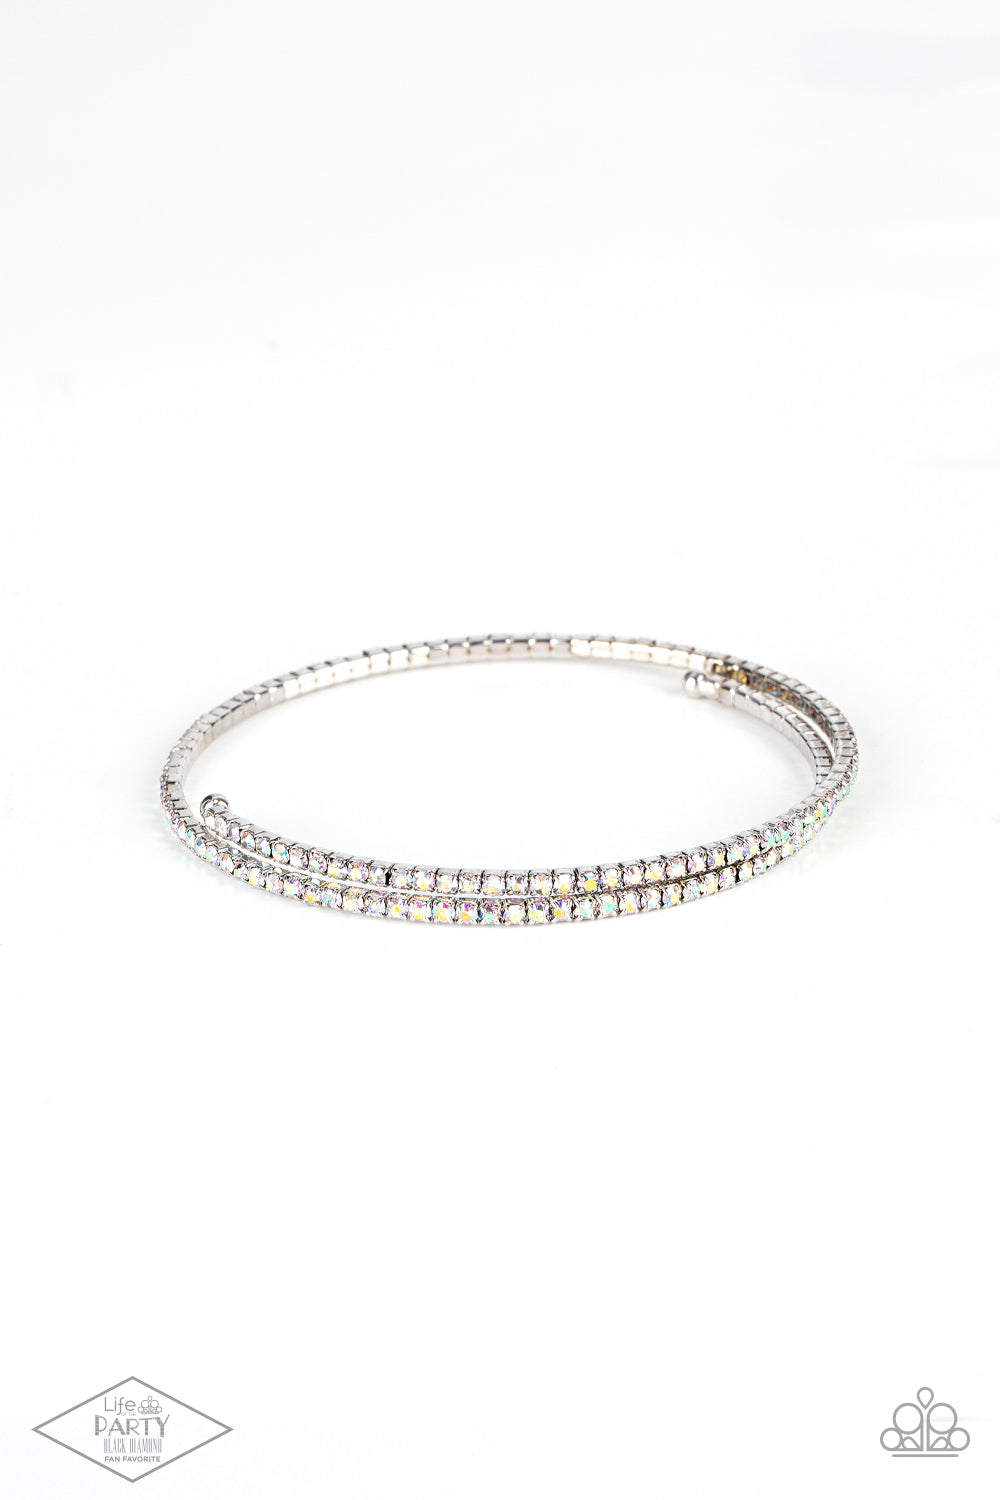 Sleek Sparkle Multi Bracelet - Paparazzi Accessories  Dotted in dainty iridescent rhinestones, a flexible wire coils around the wrist for a refined flair.  Sold as one individual bracelet. This Fan Favorite is back in the spotlight at the request of our 2021 Life of the Party member with Black Diamond Access, Brianne M.